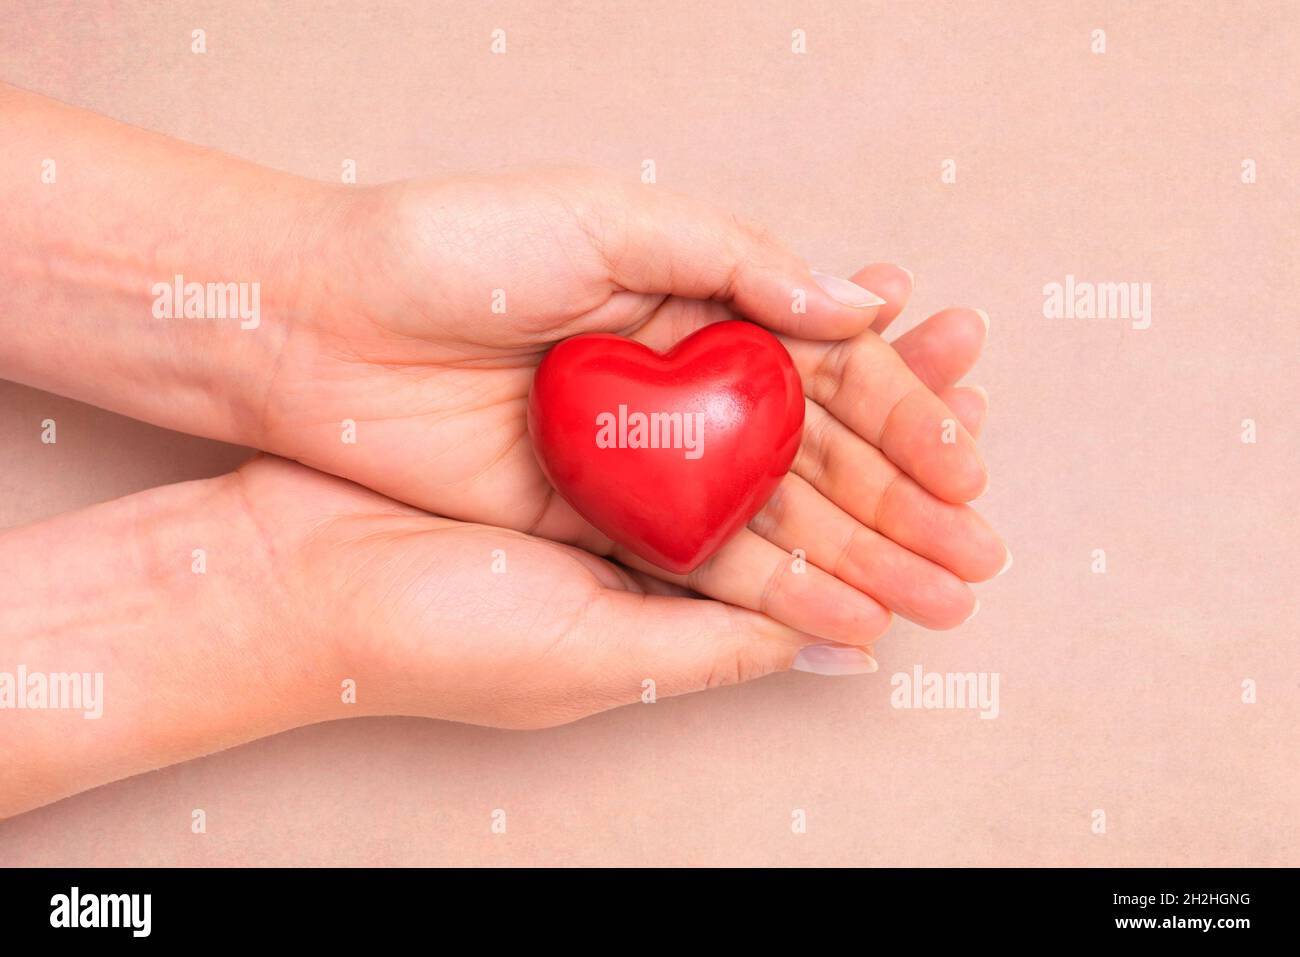 Health care concept with heart in hands. Heart as a symbol of caring and care Stock Photo